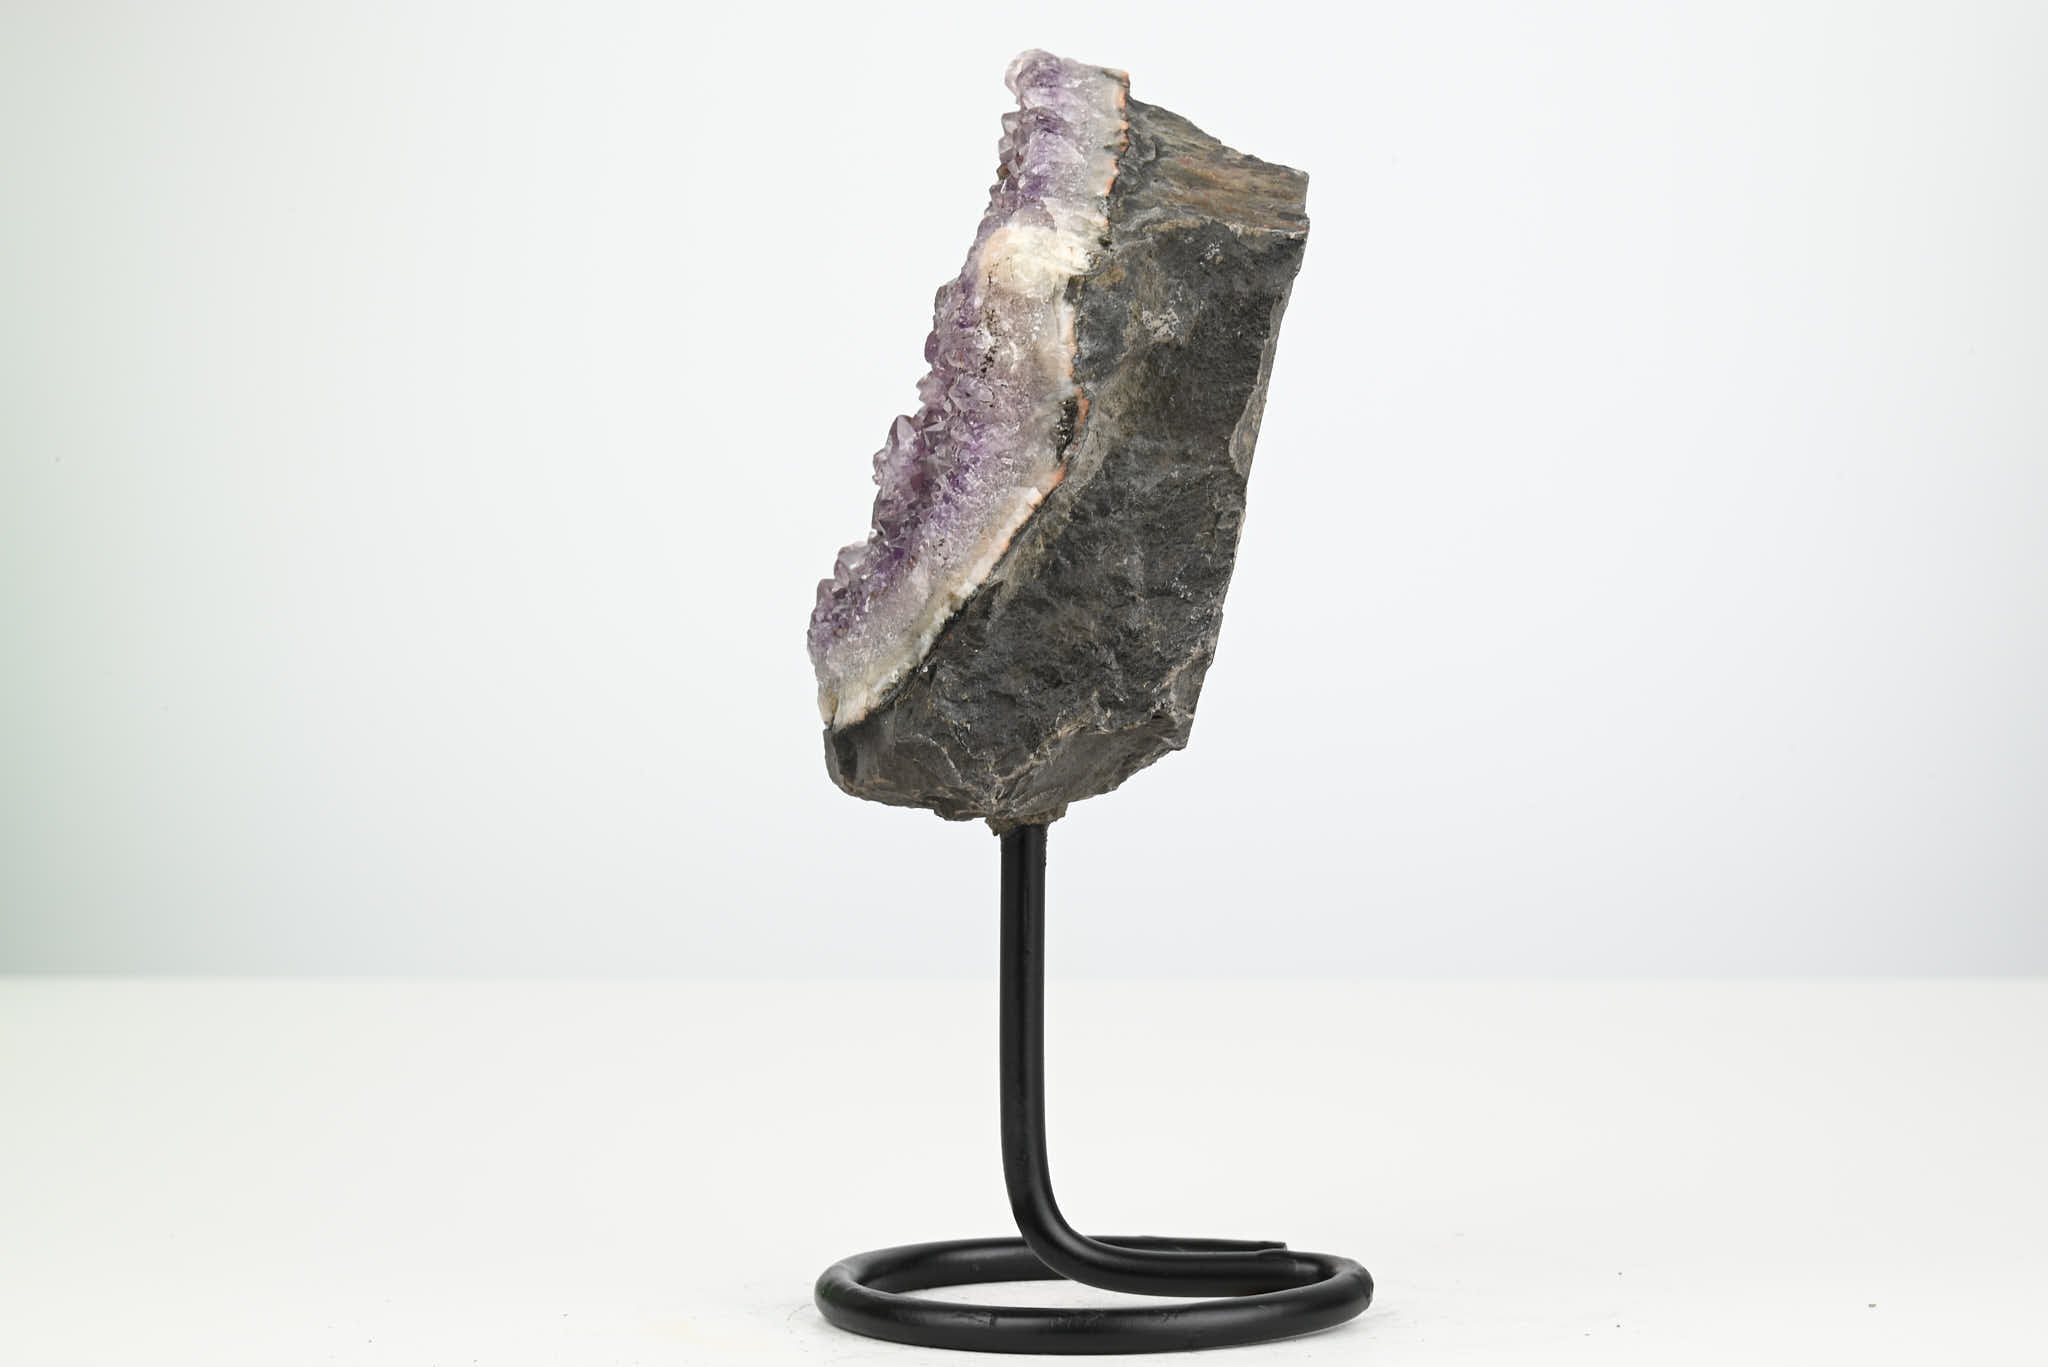 Amethyst Cluster on Stand - Small 15cm Tall - #CLUSAM-63048